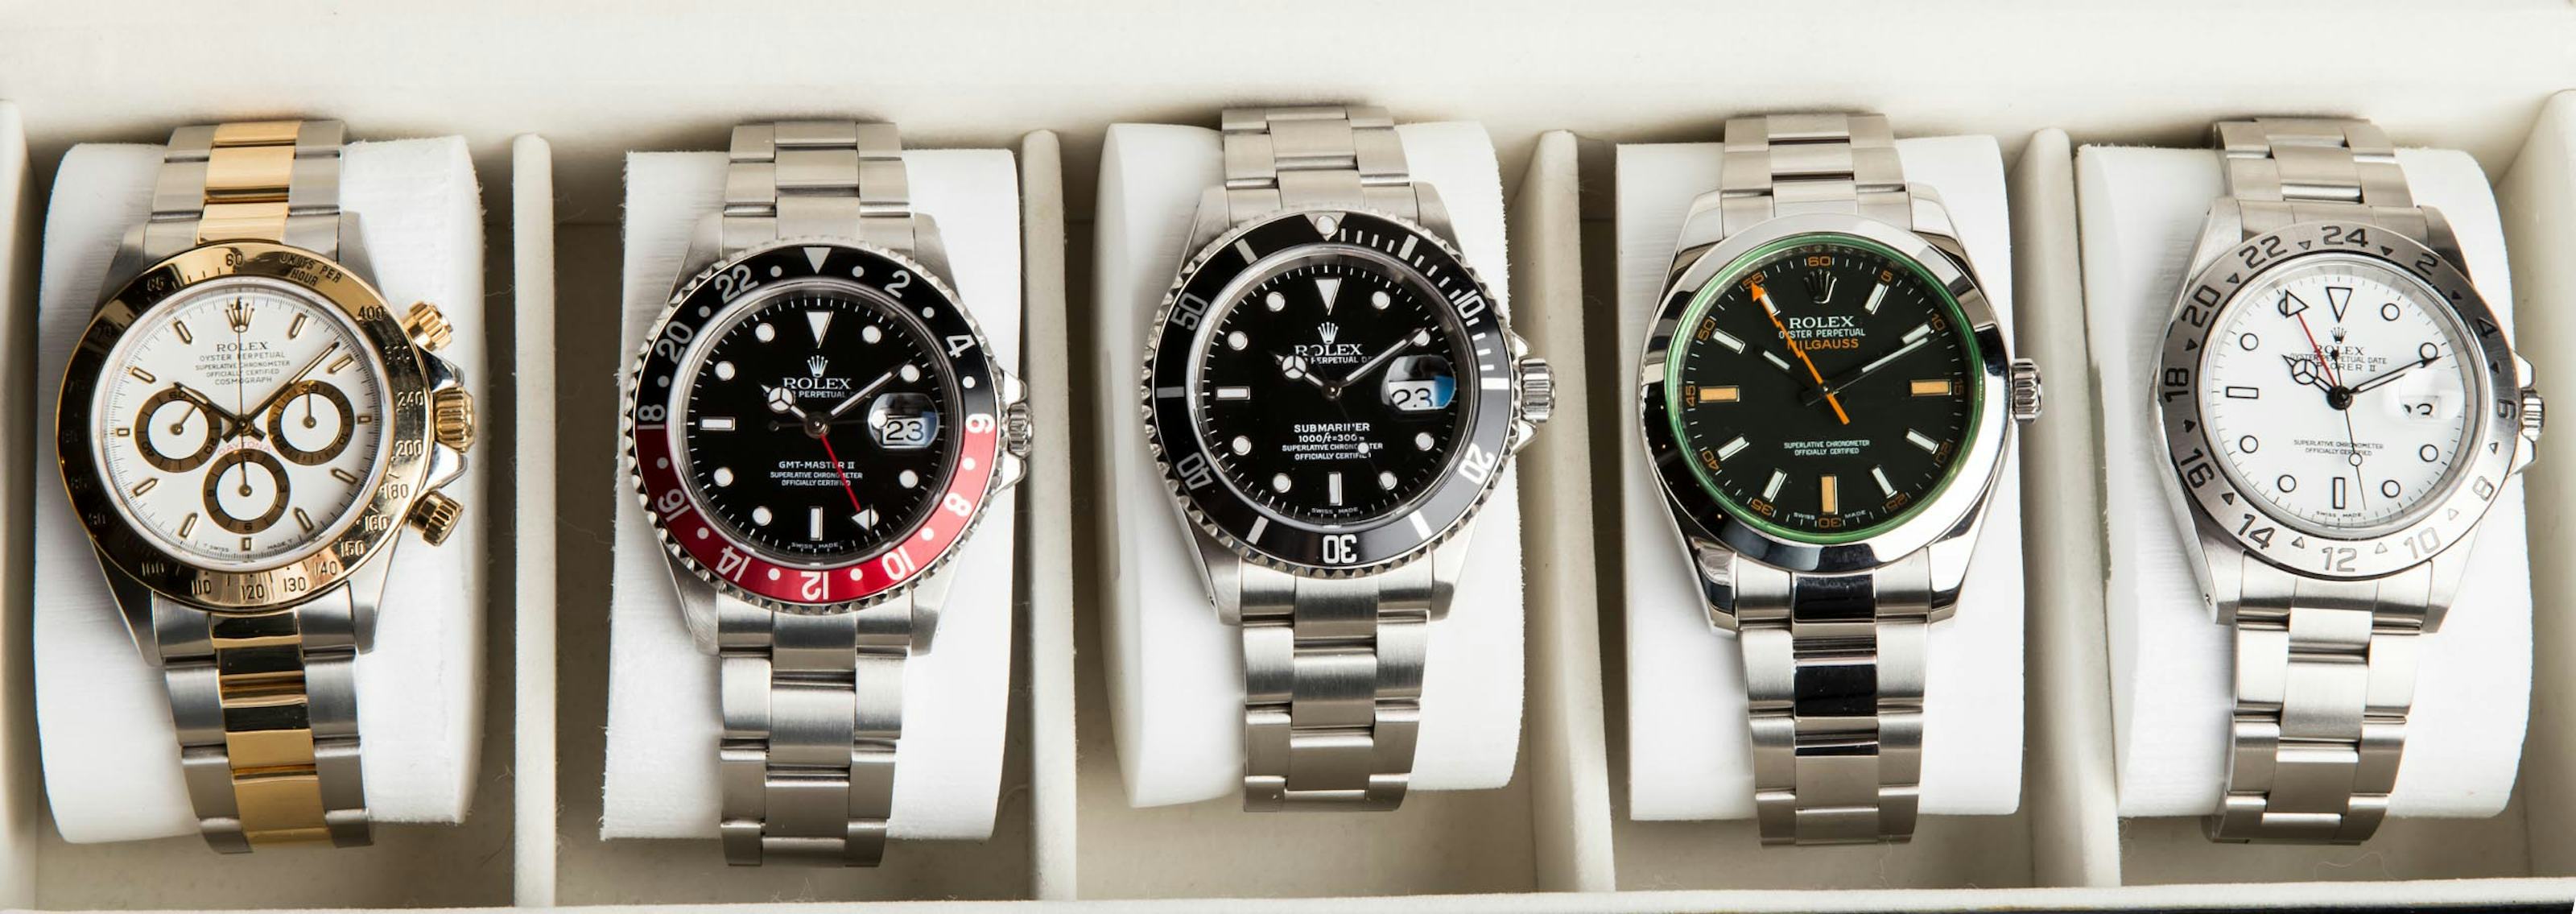 The Colorful World Of Rolex Letter Codes The Meaning Behind BLRO, BLNR